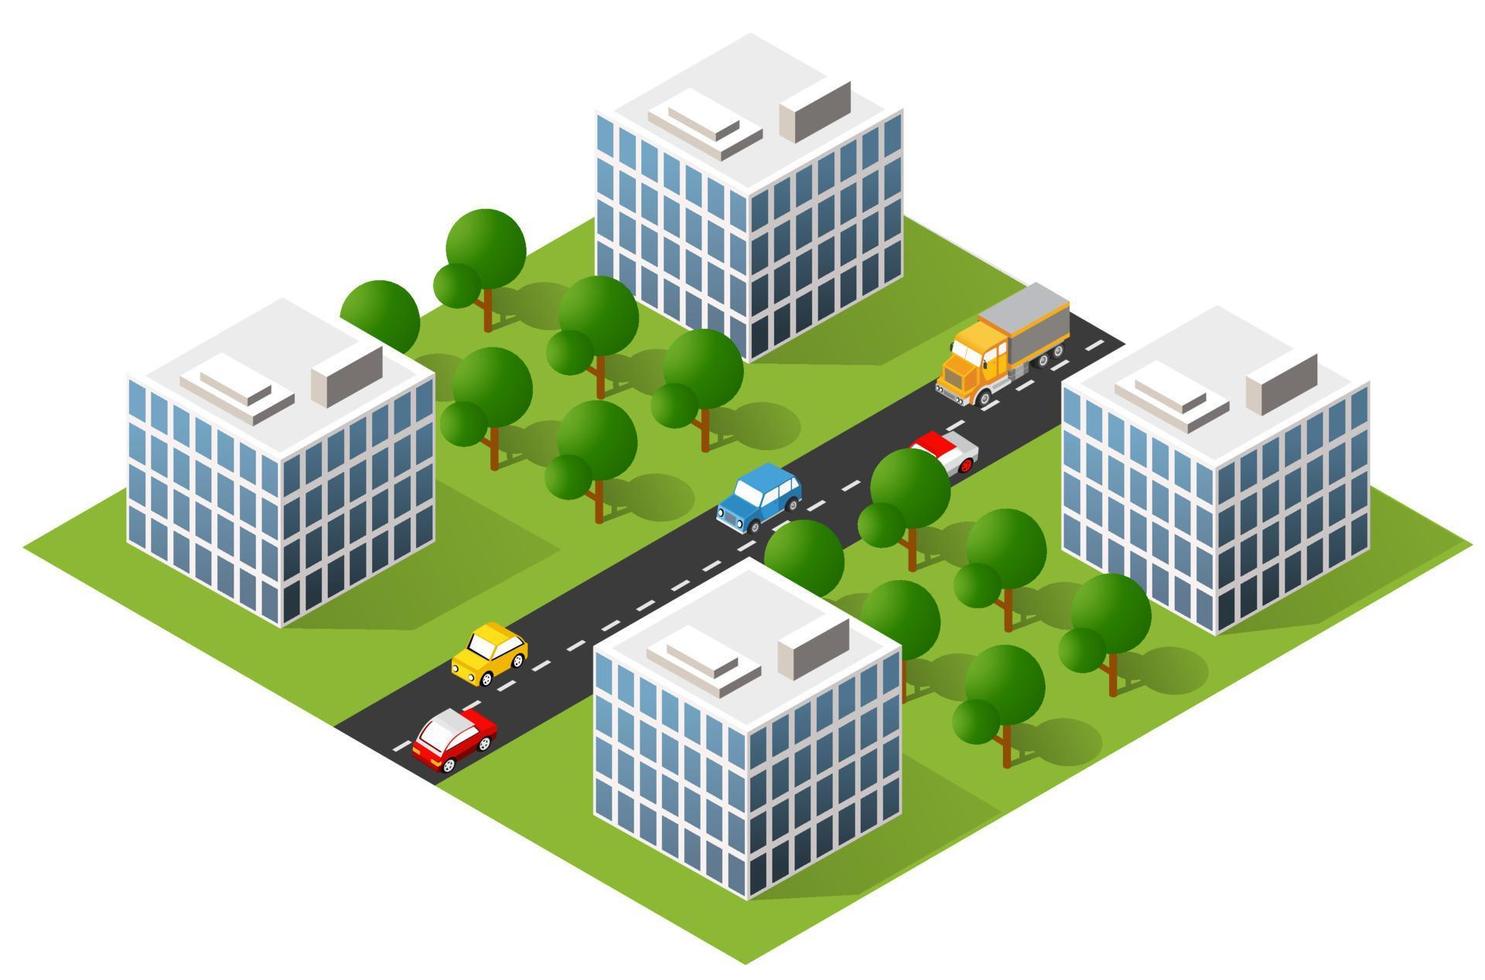 Isometric 3D illustration city urban area with a lot of houses and skyscrapers, streets, trees and vehicles vector